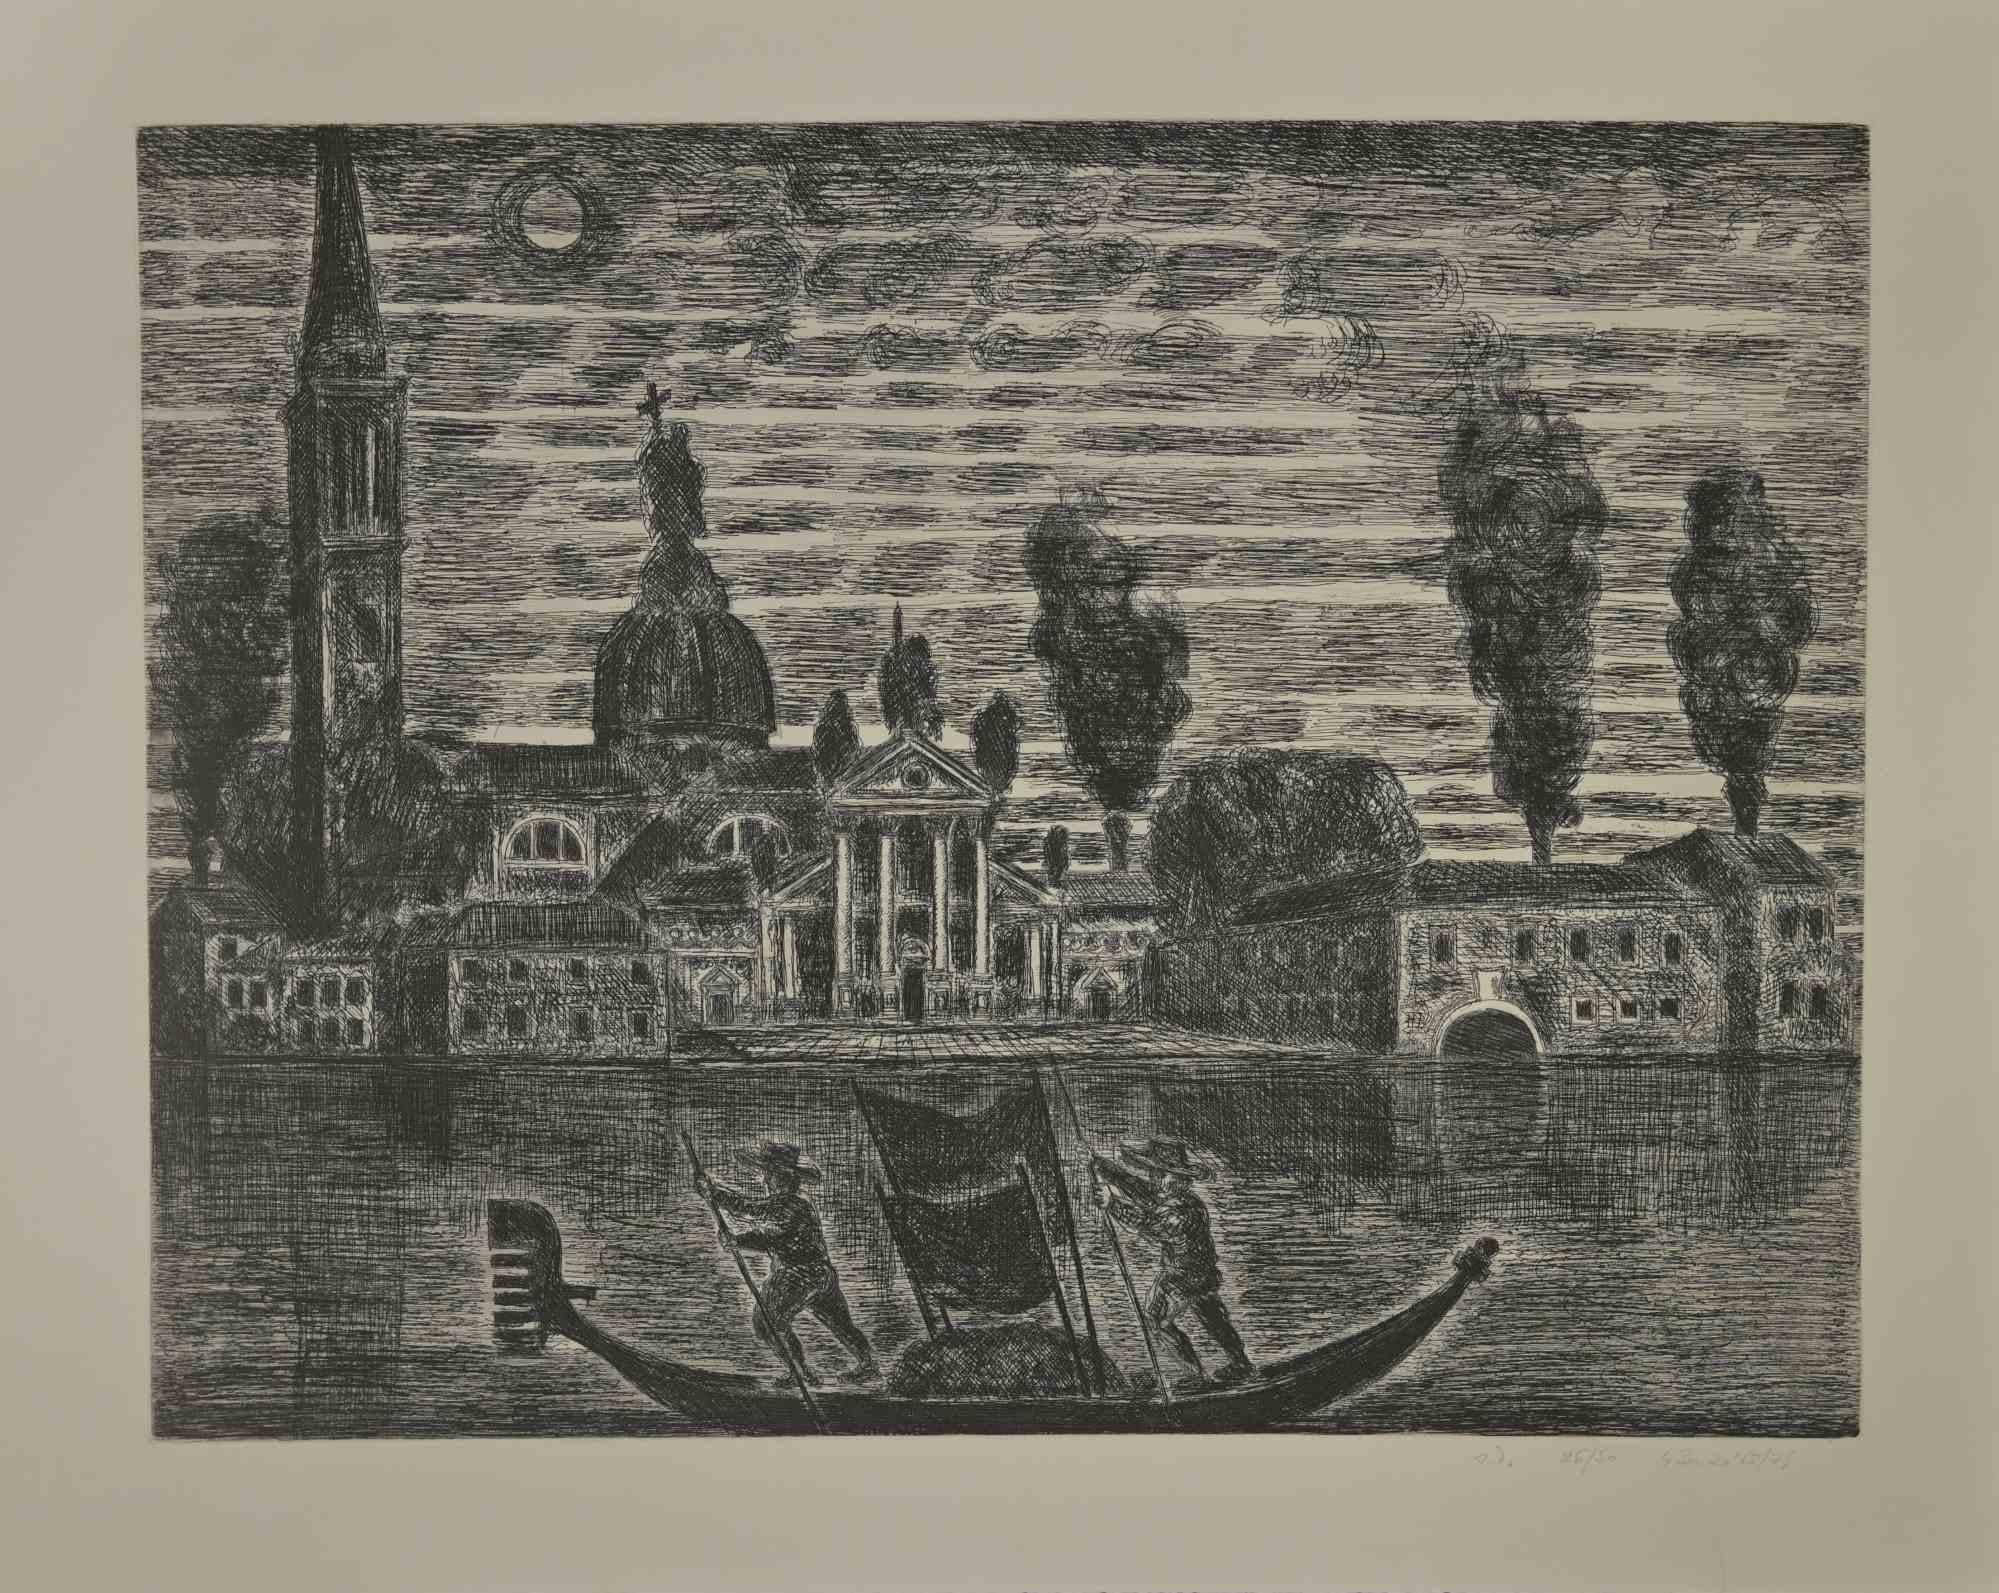 Gondoliers in Venice is an etching realized by Gianpaolo Berto in 1974.

60 X 75 cm, no frame.

Edition 28/50. Numbered and firmed by the artist in the lower margin.

Good conditions.

 

Gianpaolo Berto (1940) was born and raised in the